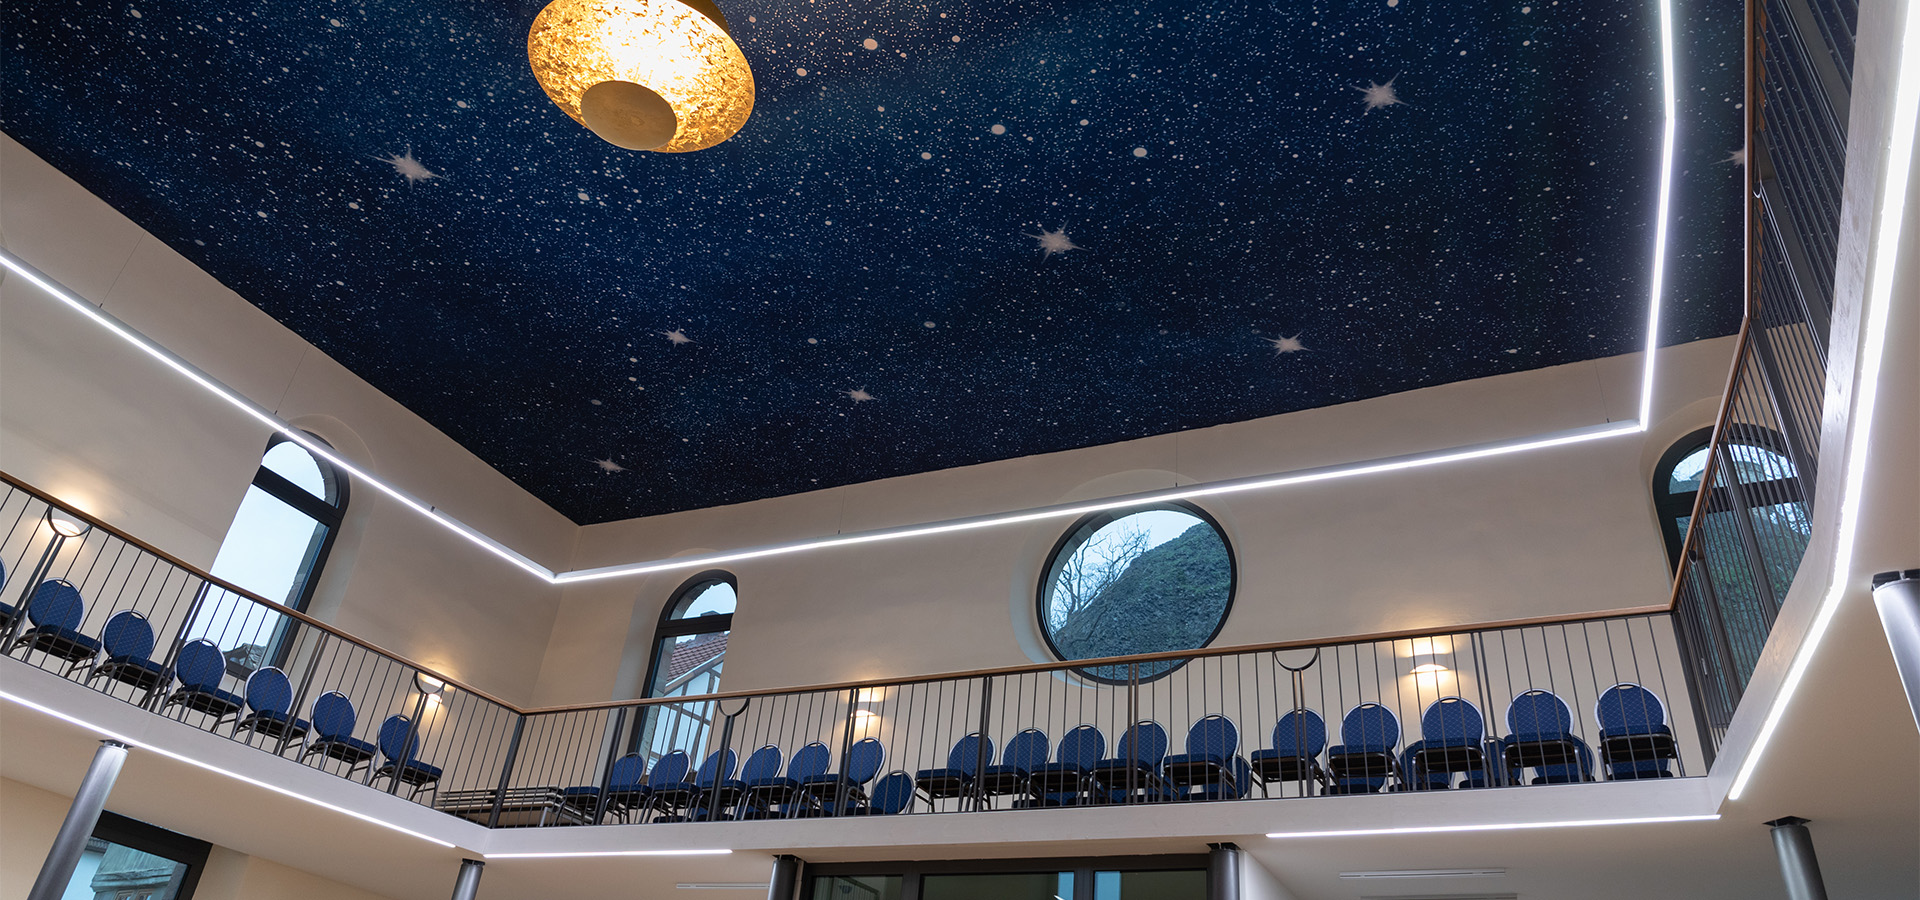 Church lighting ideas with emotional significance and RGBW Luxsystem luminaires from HADLER